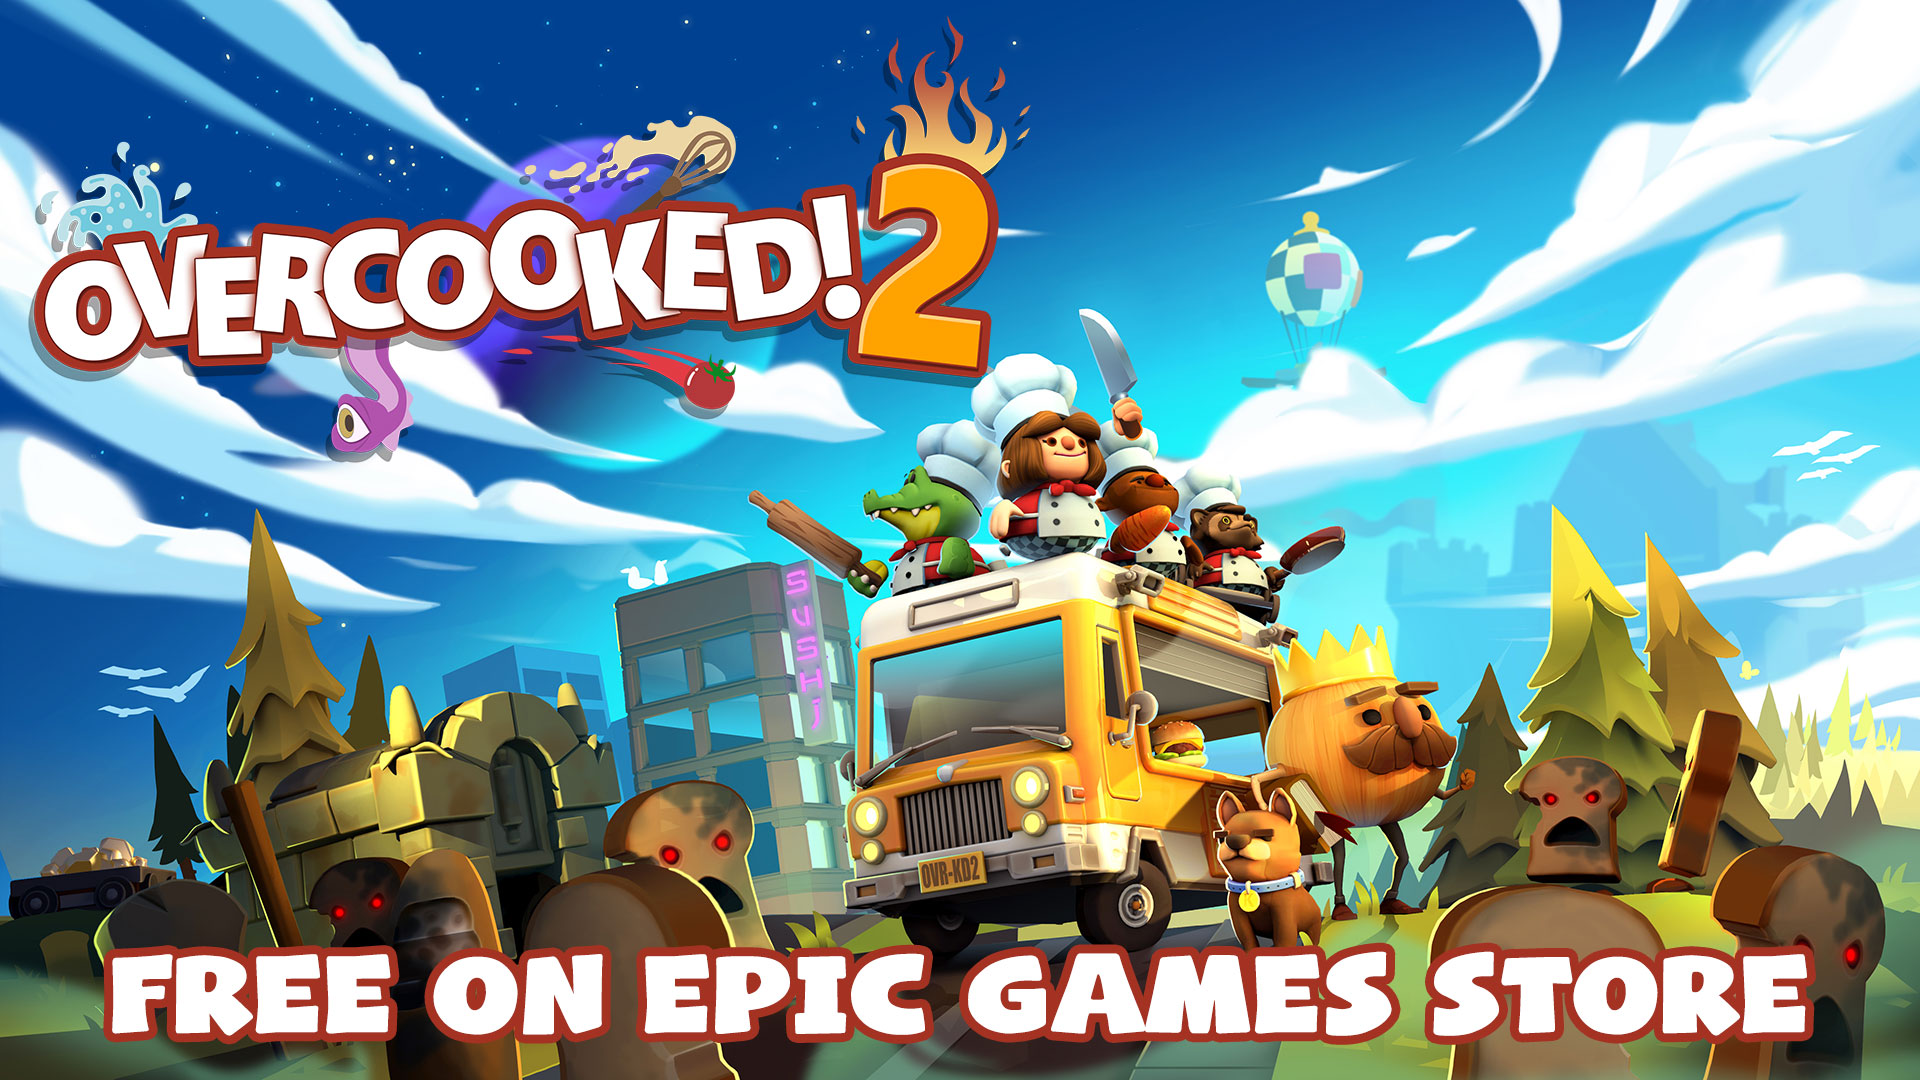 Overcooked! 2 – Free on Epic Games and PC Crossplay Patch | Team17 ...
